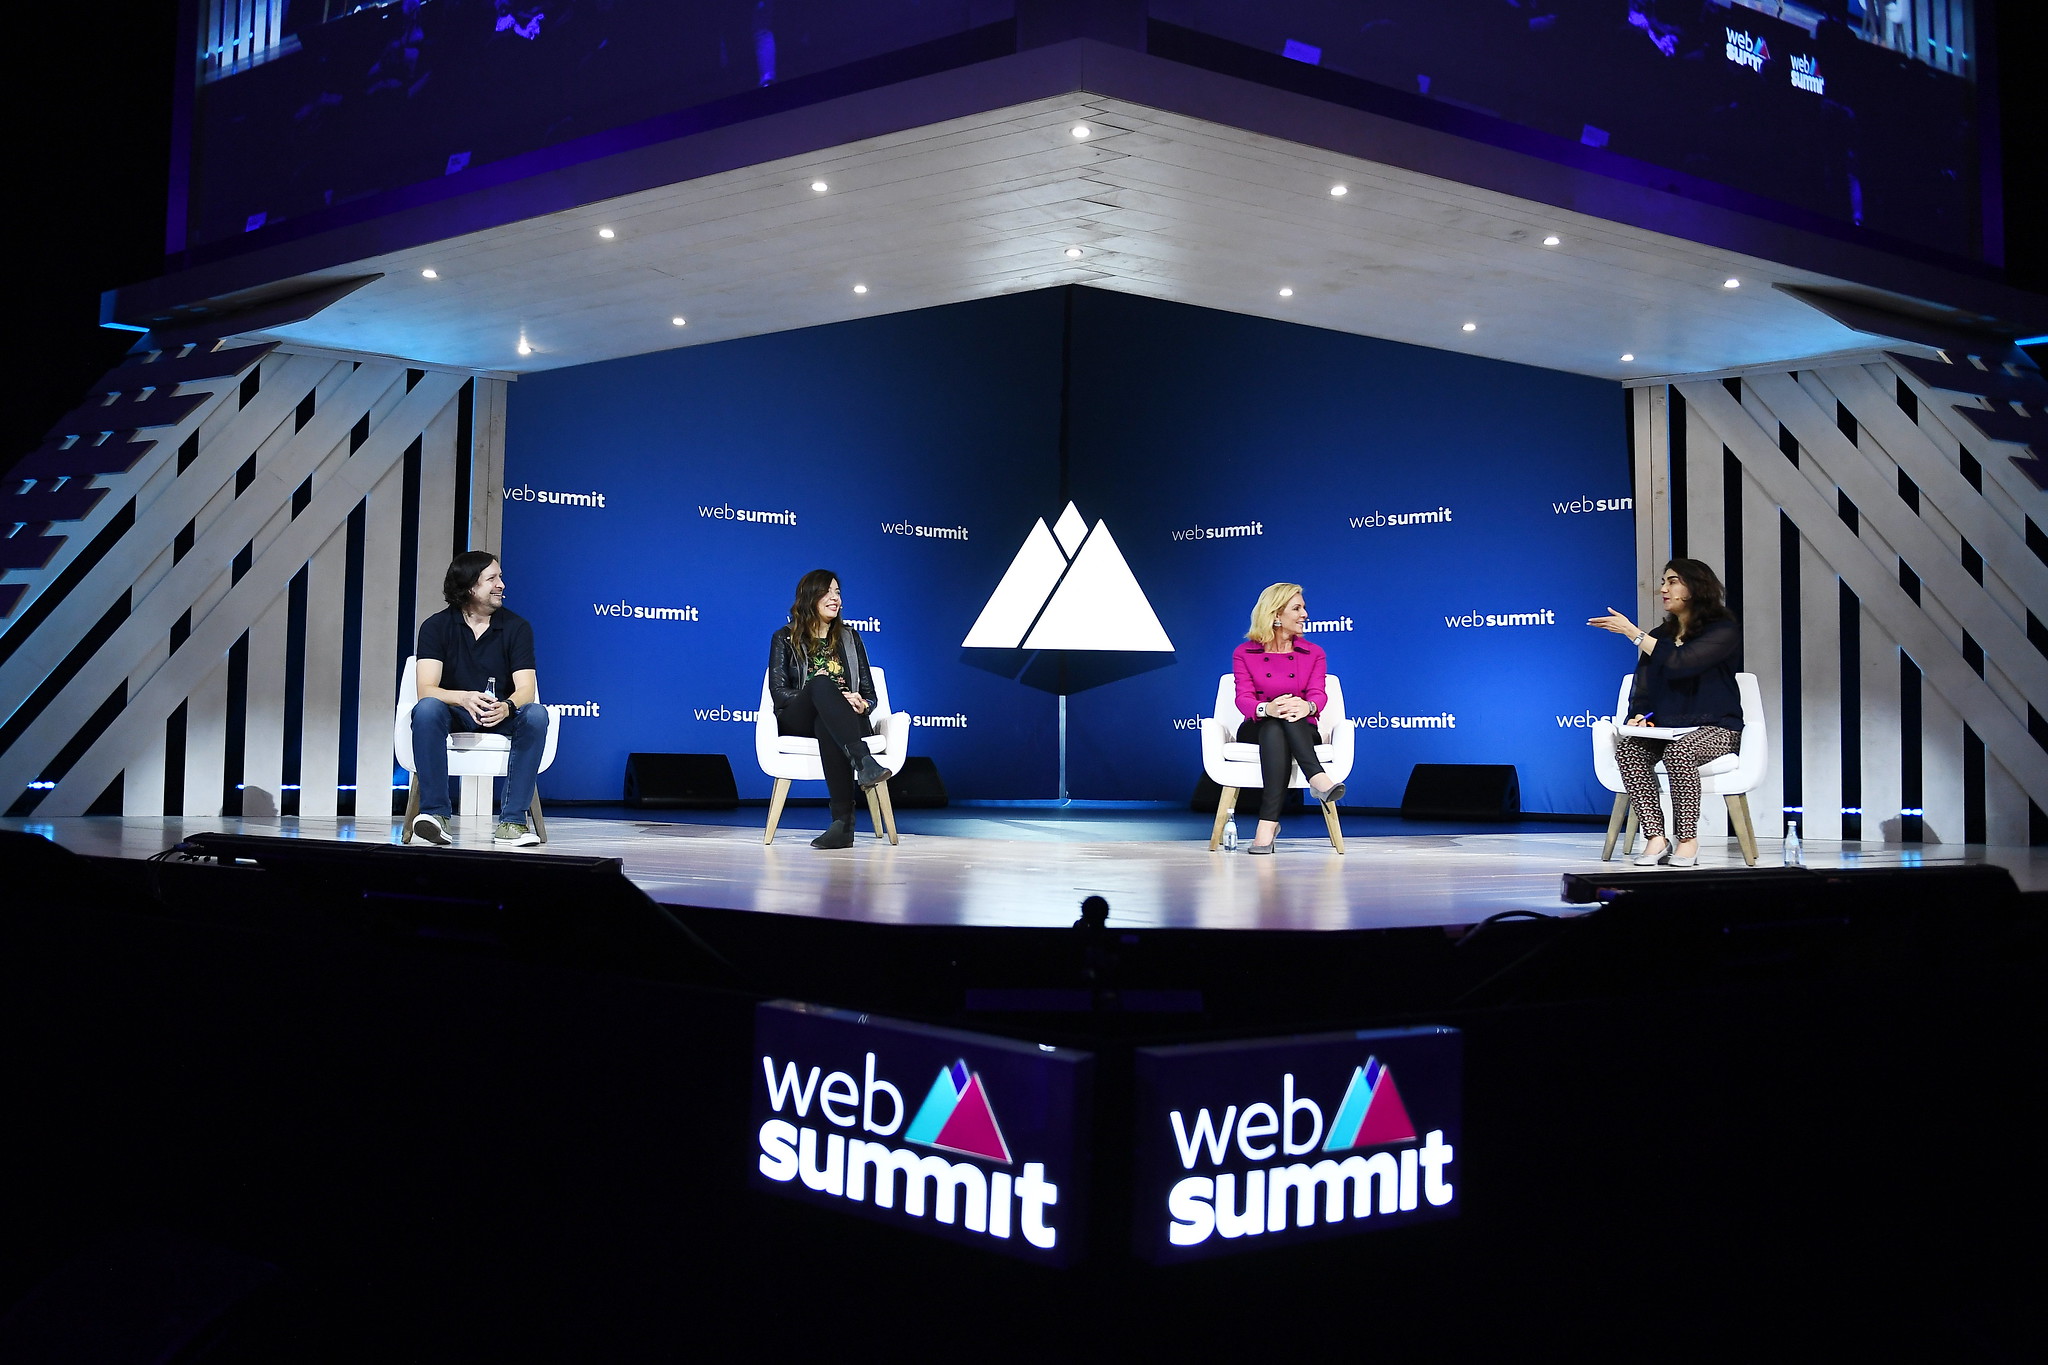 A photograph of four speakers (Jager McConnell, Mada Seghete, Christal Bemont, and Alisa Cohn) sitting on stage at Web Summit. They appear to be having a panel discussion. The photograph is zoomed out, and the entire stage is visible. There are two Web Summit logos beneath the stage.